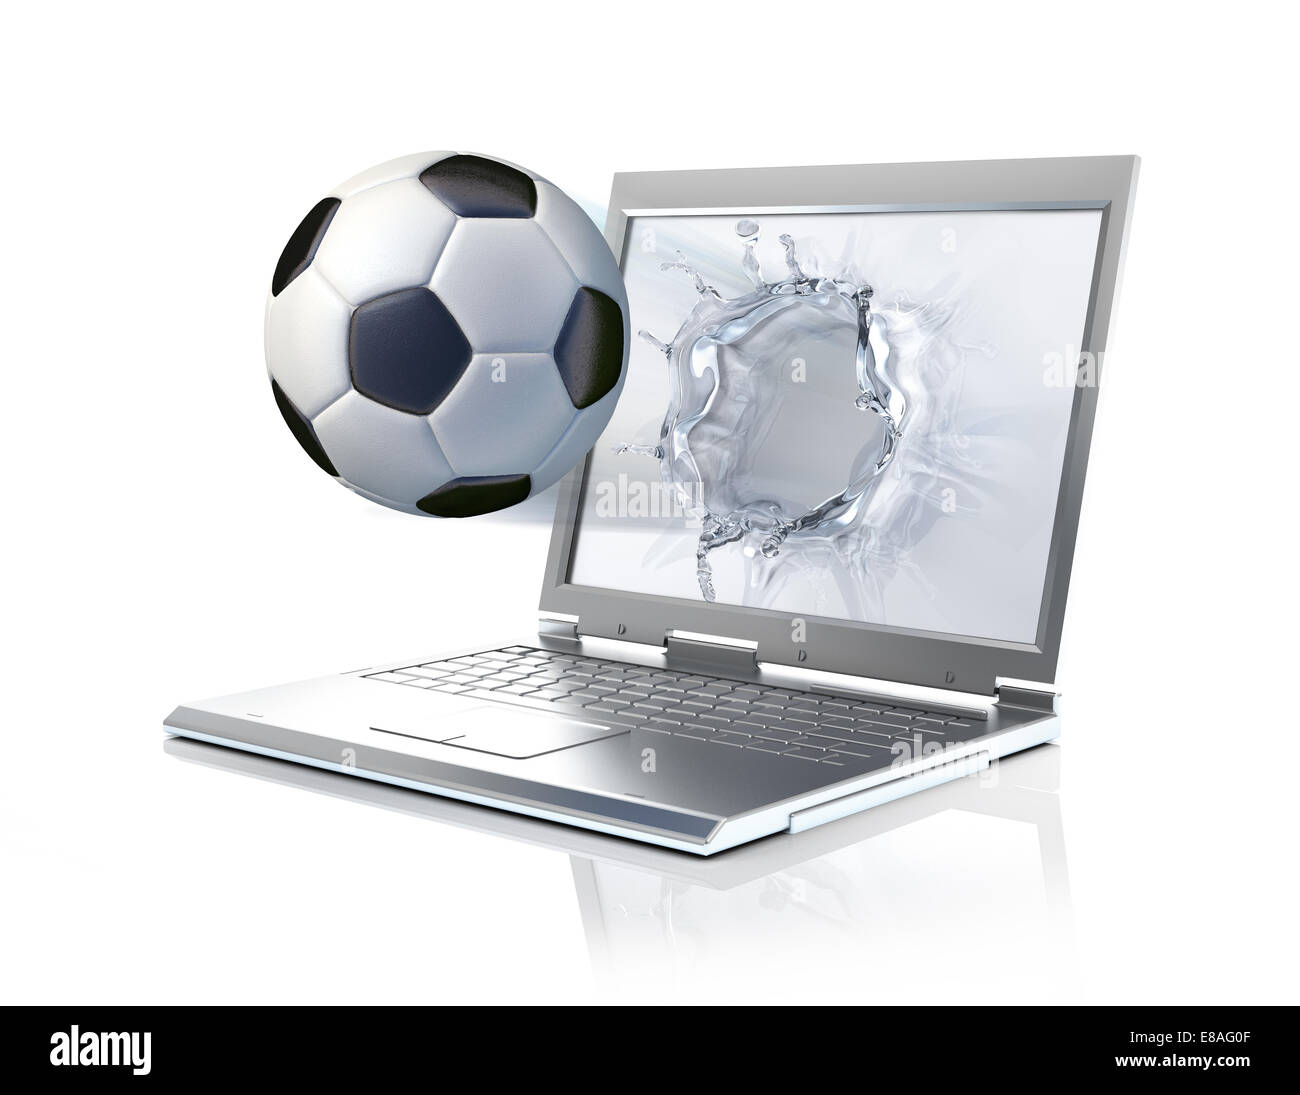 Football ball coming out from a laptop computer, forming a liquid splash on the screen. Isolated on white background Stock Photo